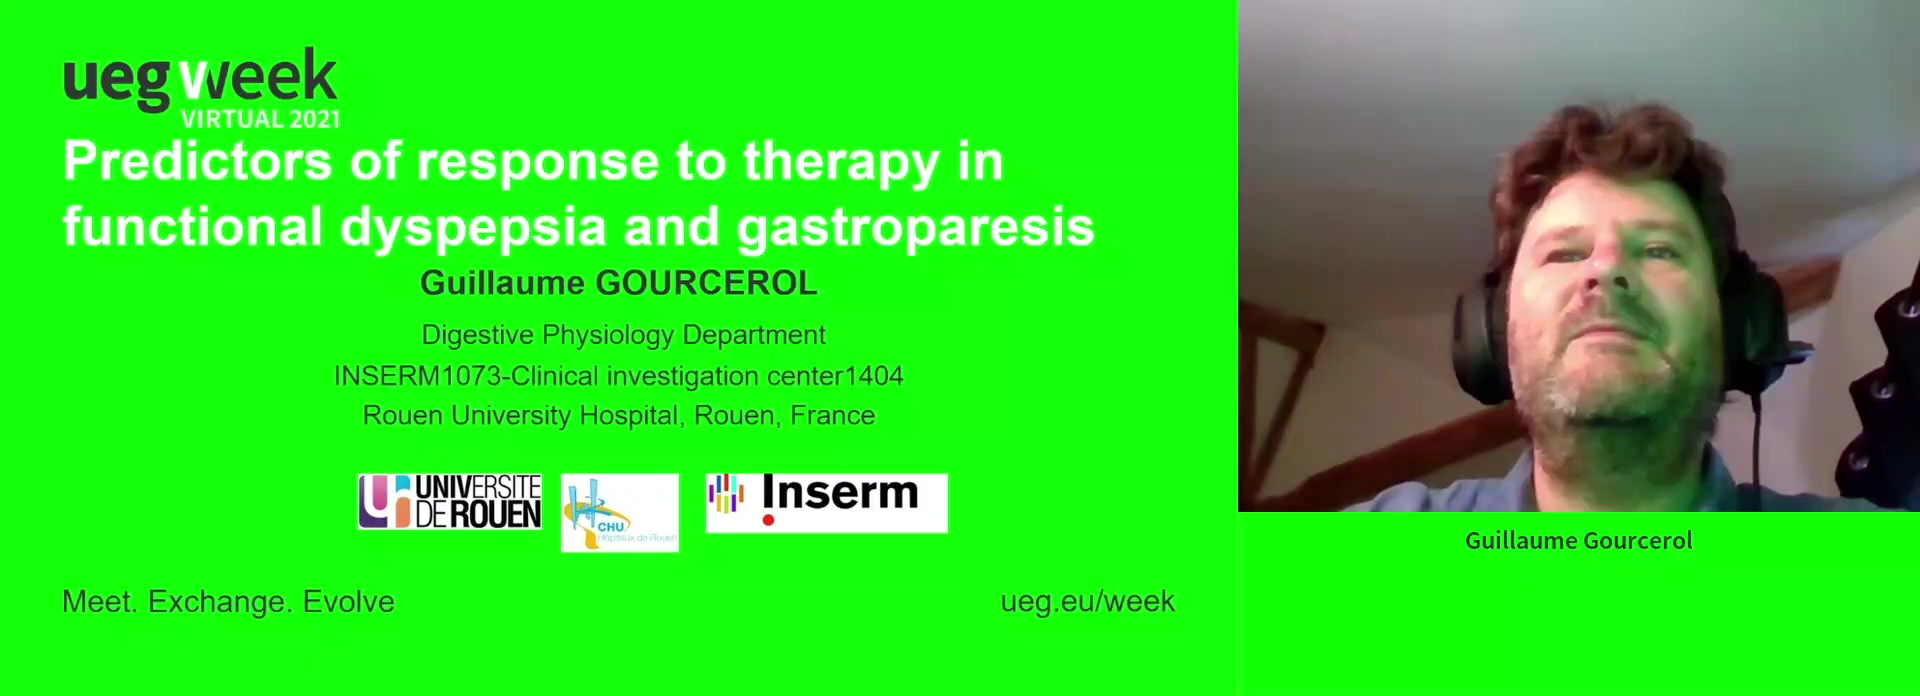 Predictors of response to therapy in functional dyspepsia and gastroparesis